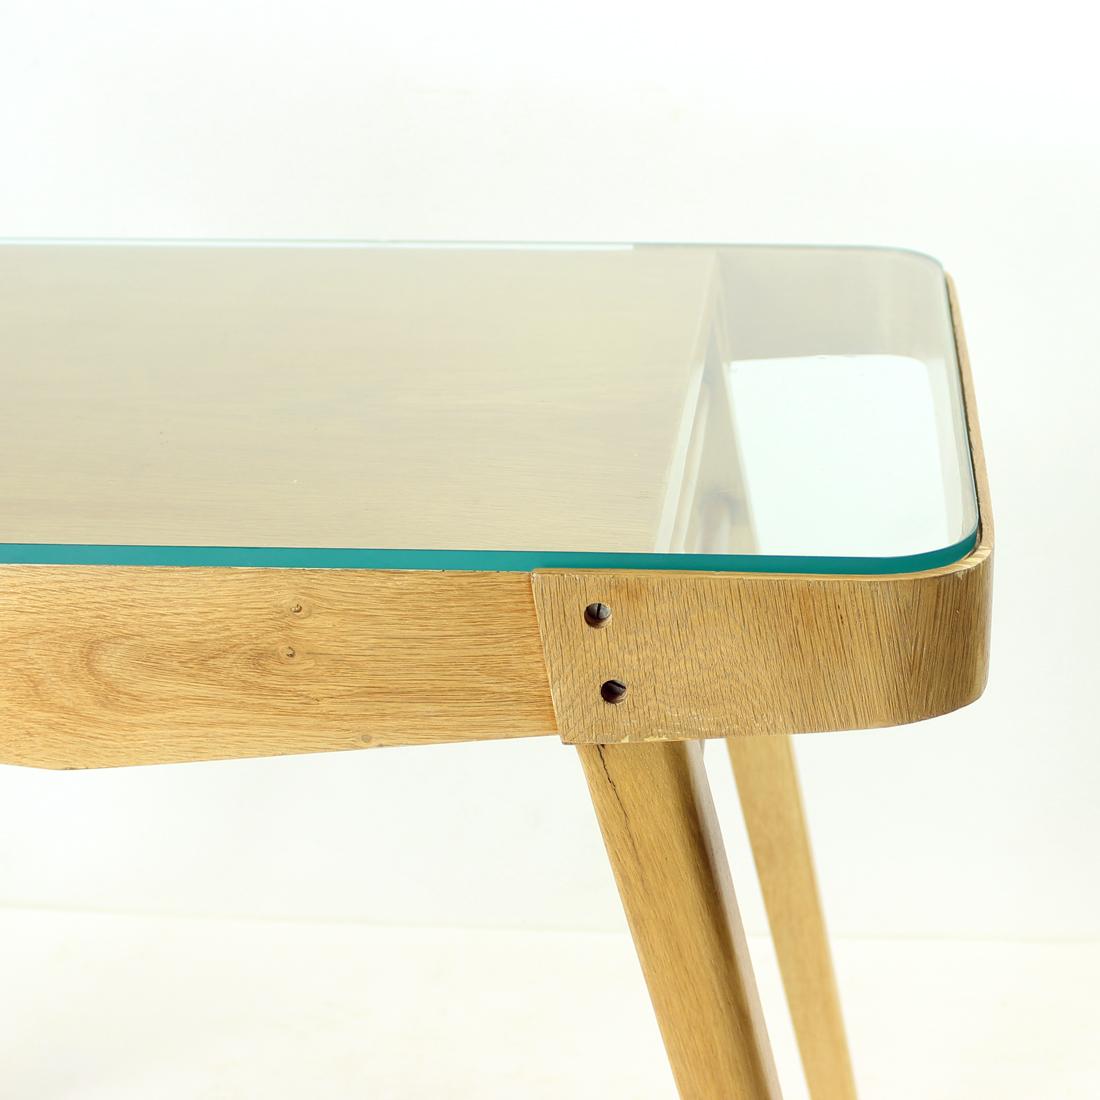 Mid-20th Century Mid Century Coffee Table In Oak And Glass, Czechoslovakia 1960s For Sale